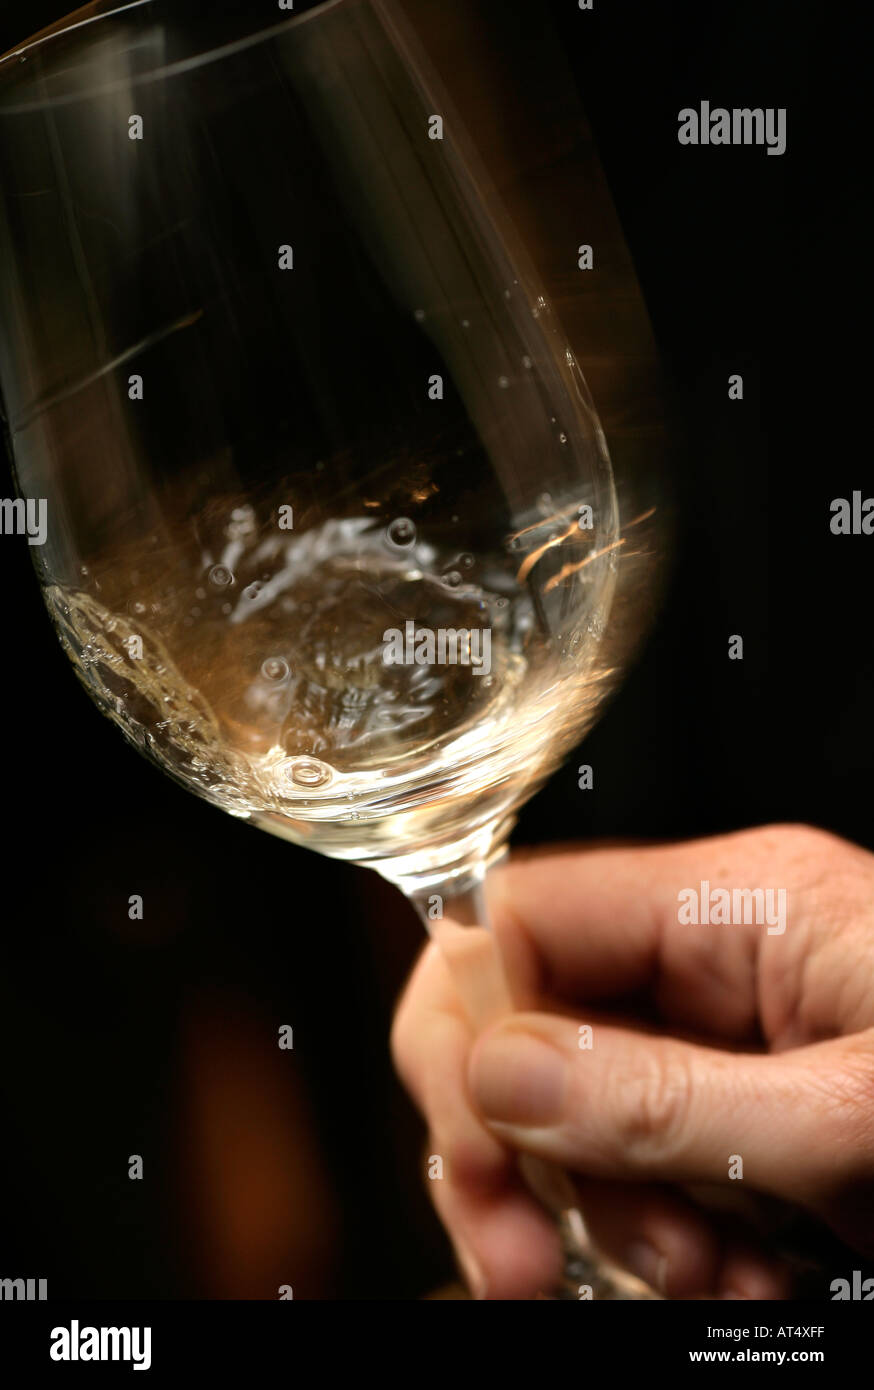 White wine being swirled in a glass Stock Photo